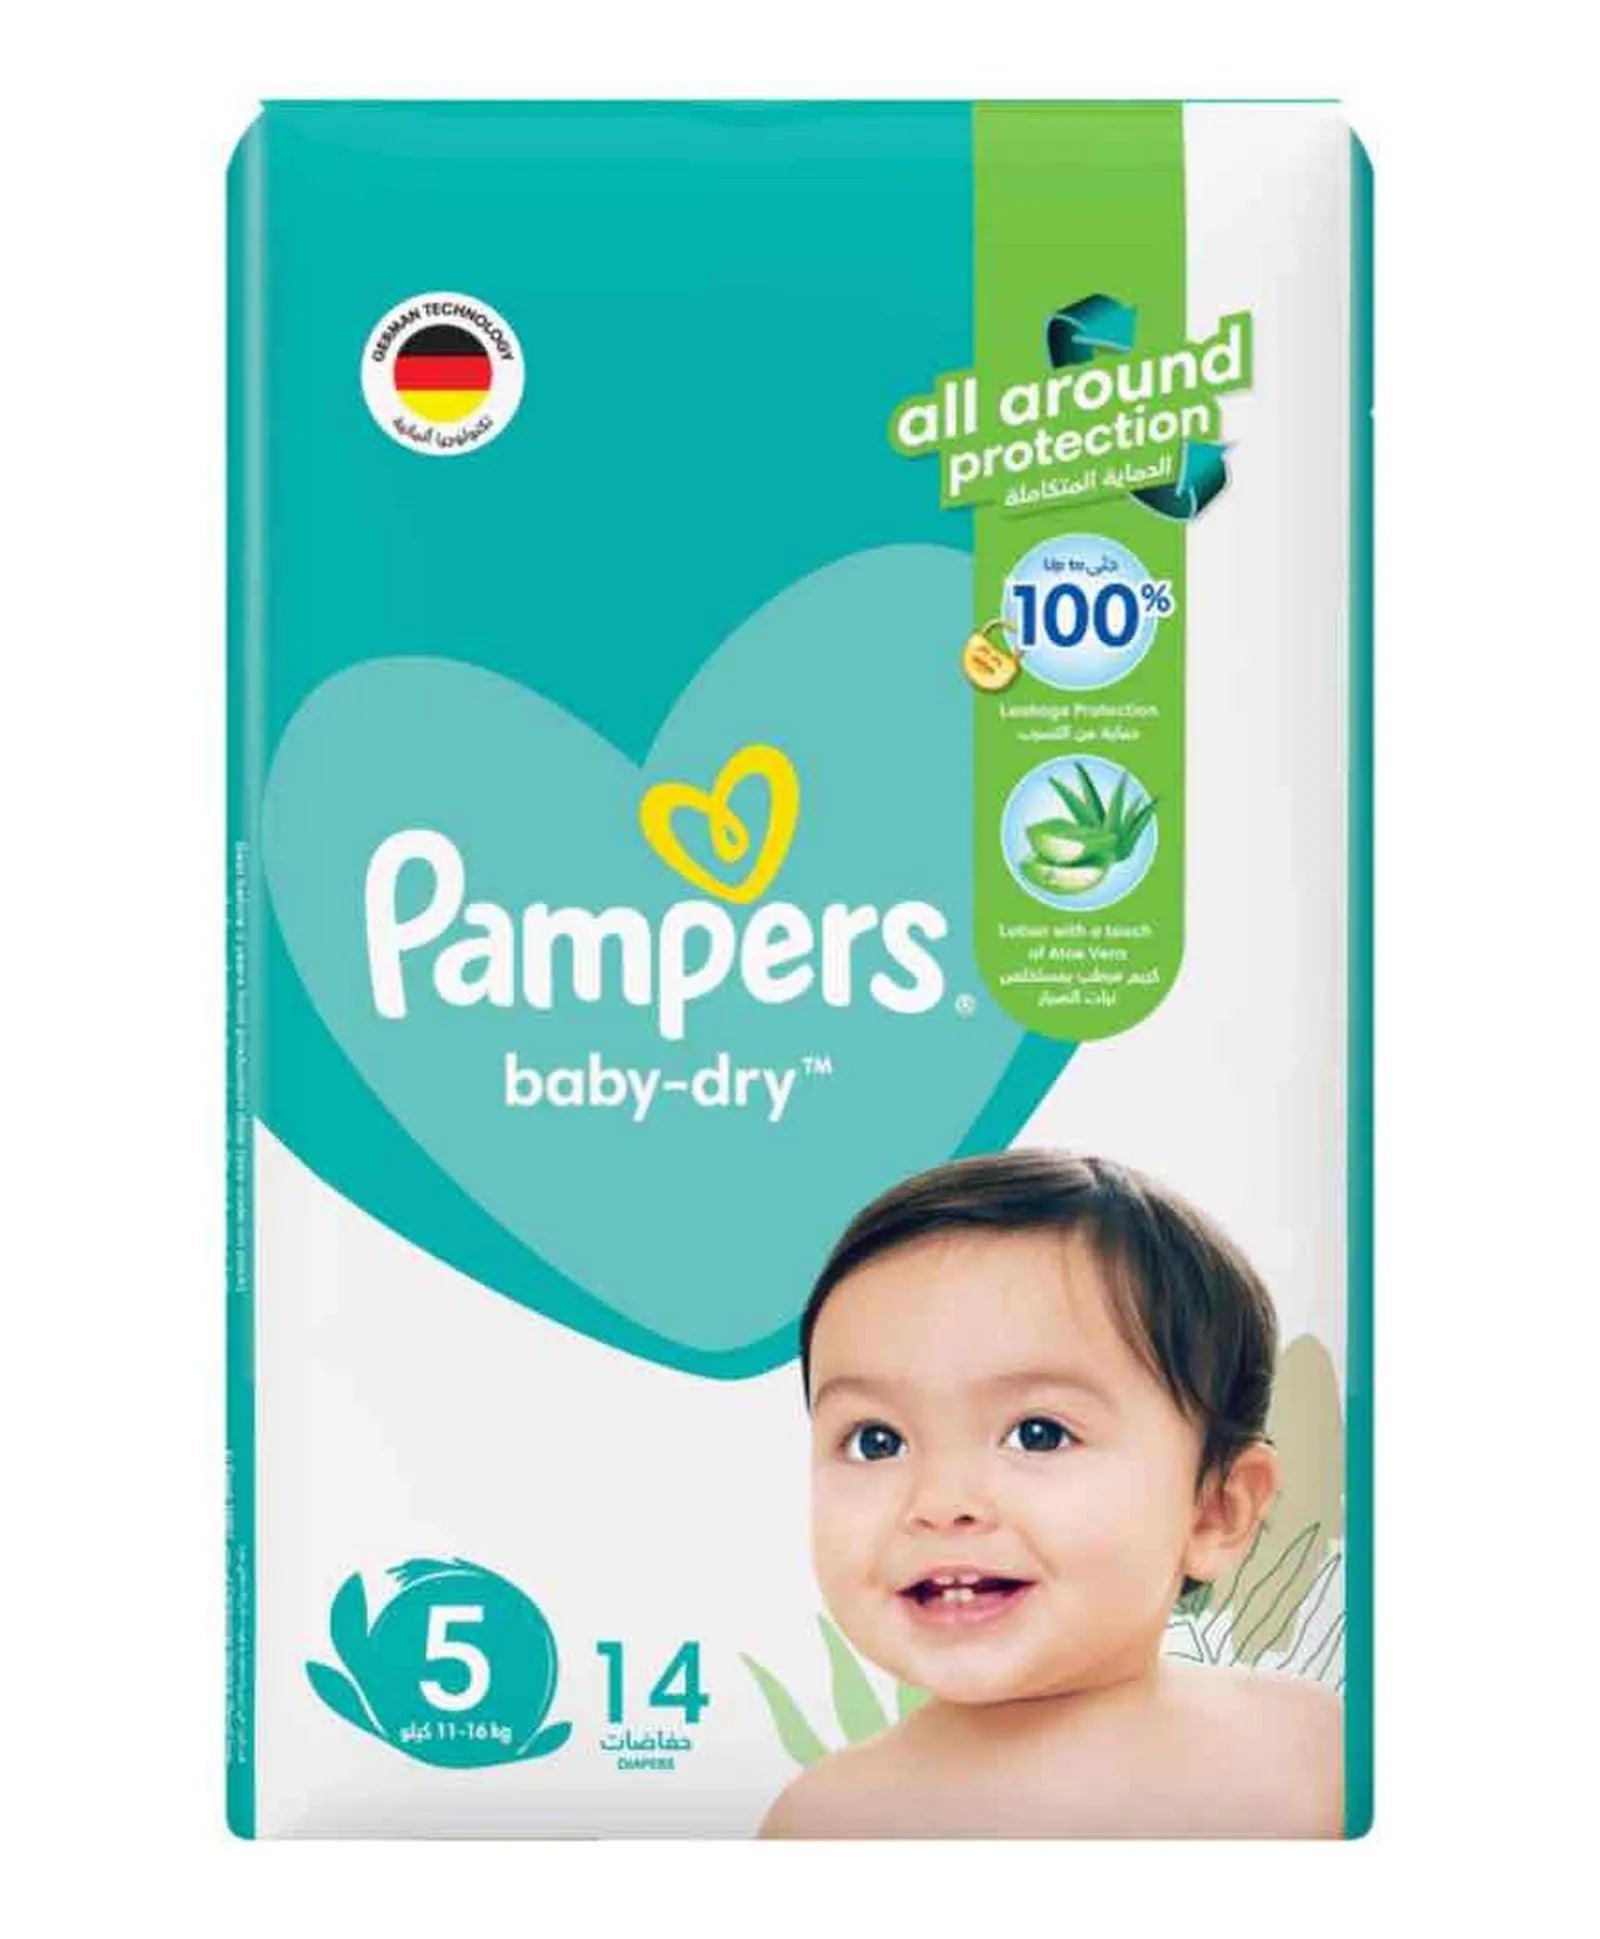 Pampers Baby Dry Diapers with Aloe Vera Lotion and Leakage Protection Size 5 - 14 - Wellness Shoppee